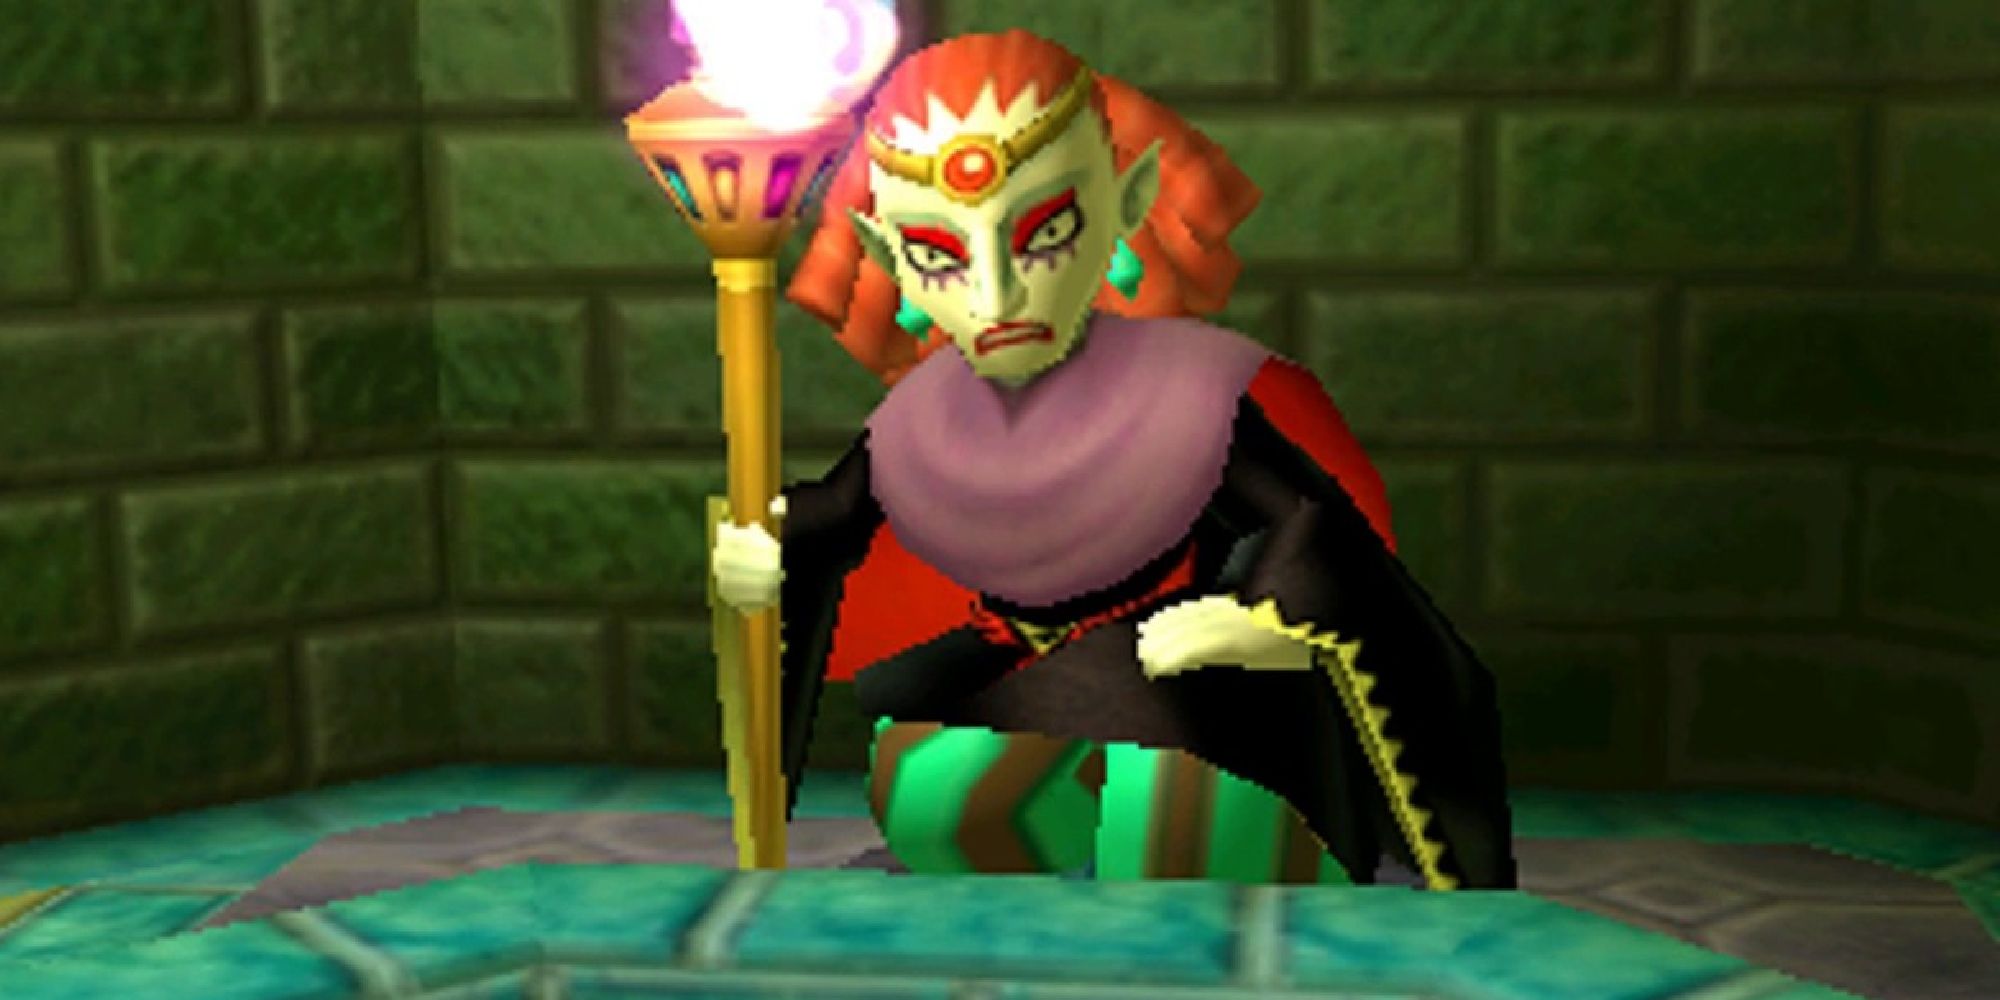 Yuga holding his staff and looking frightened